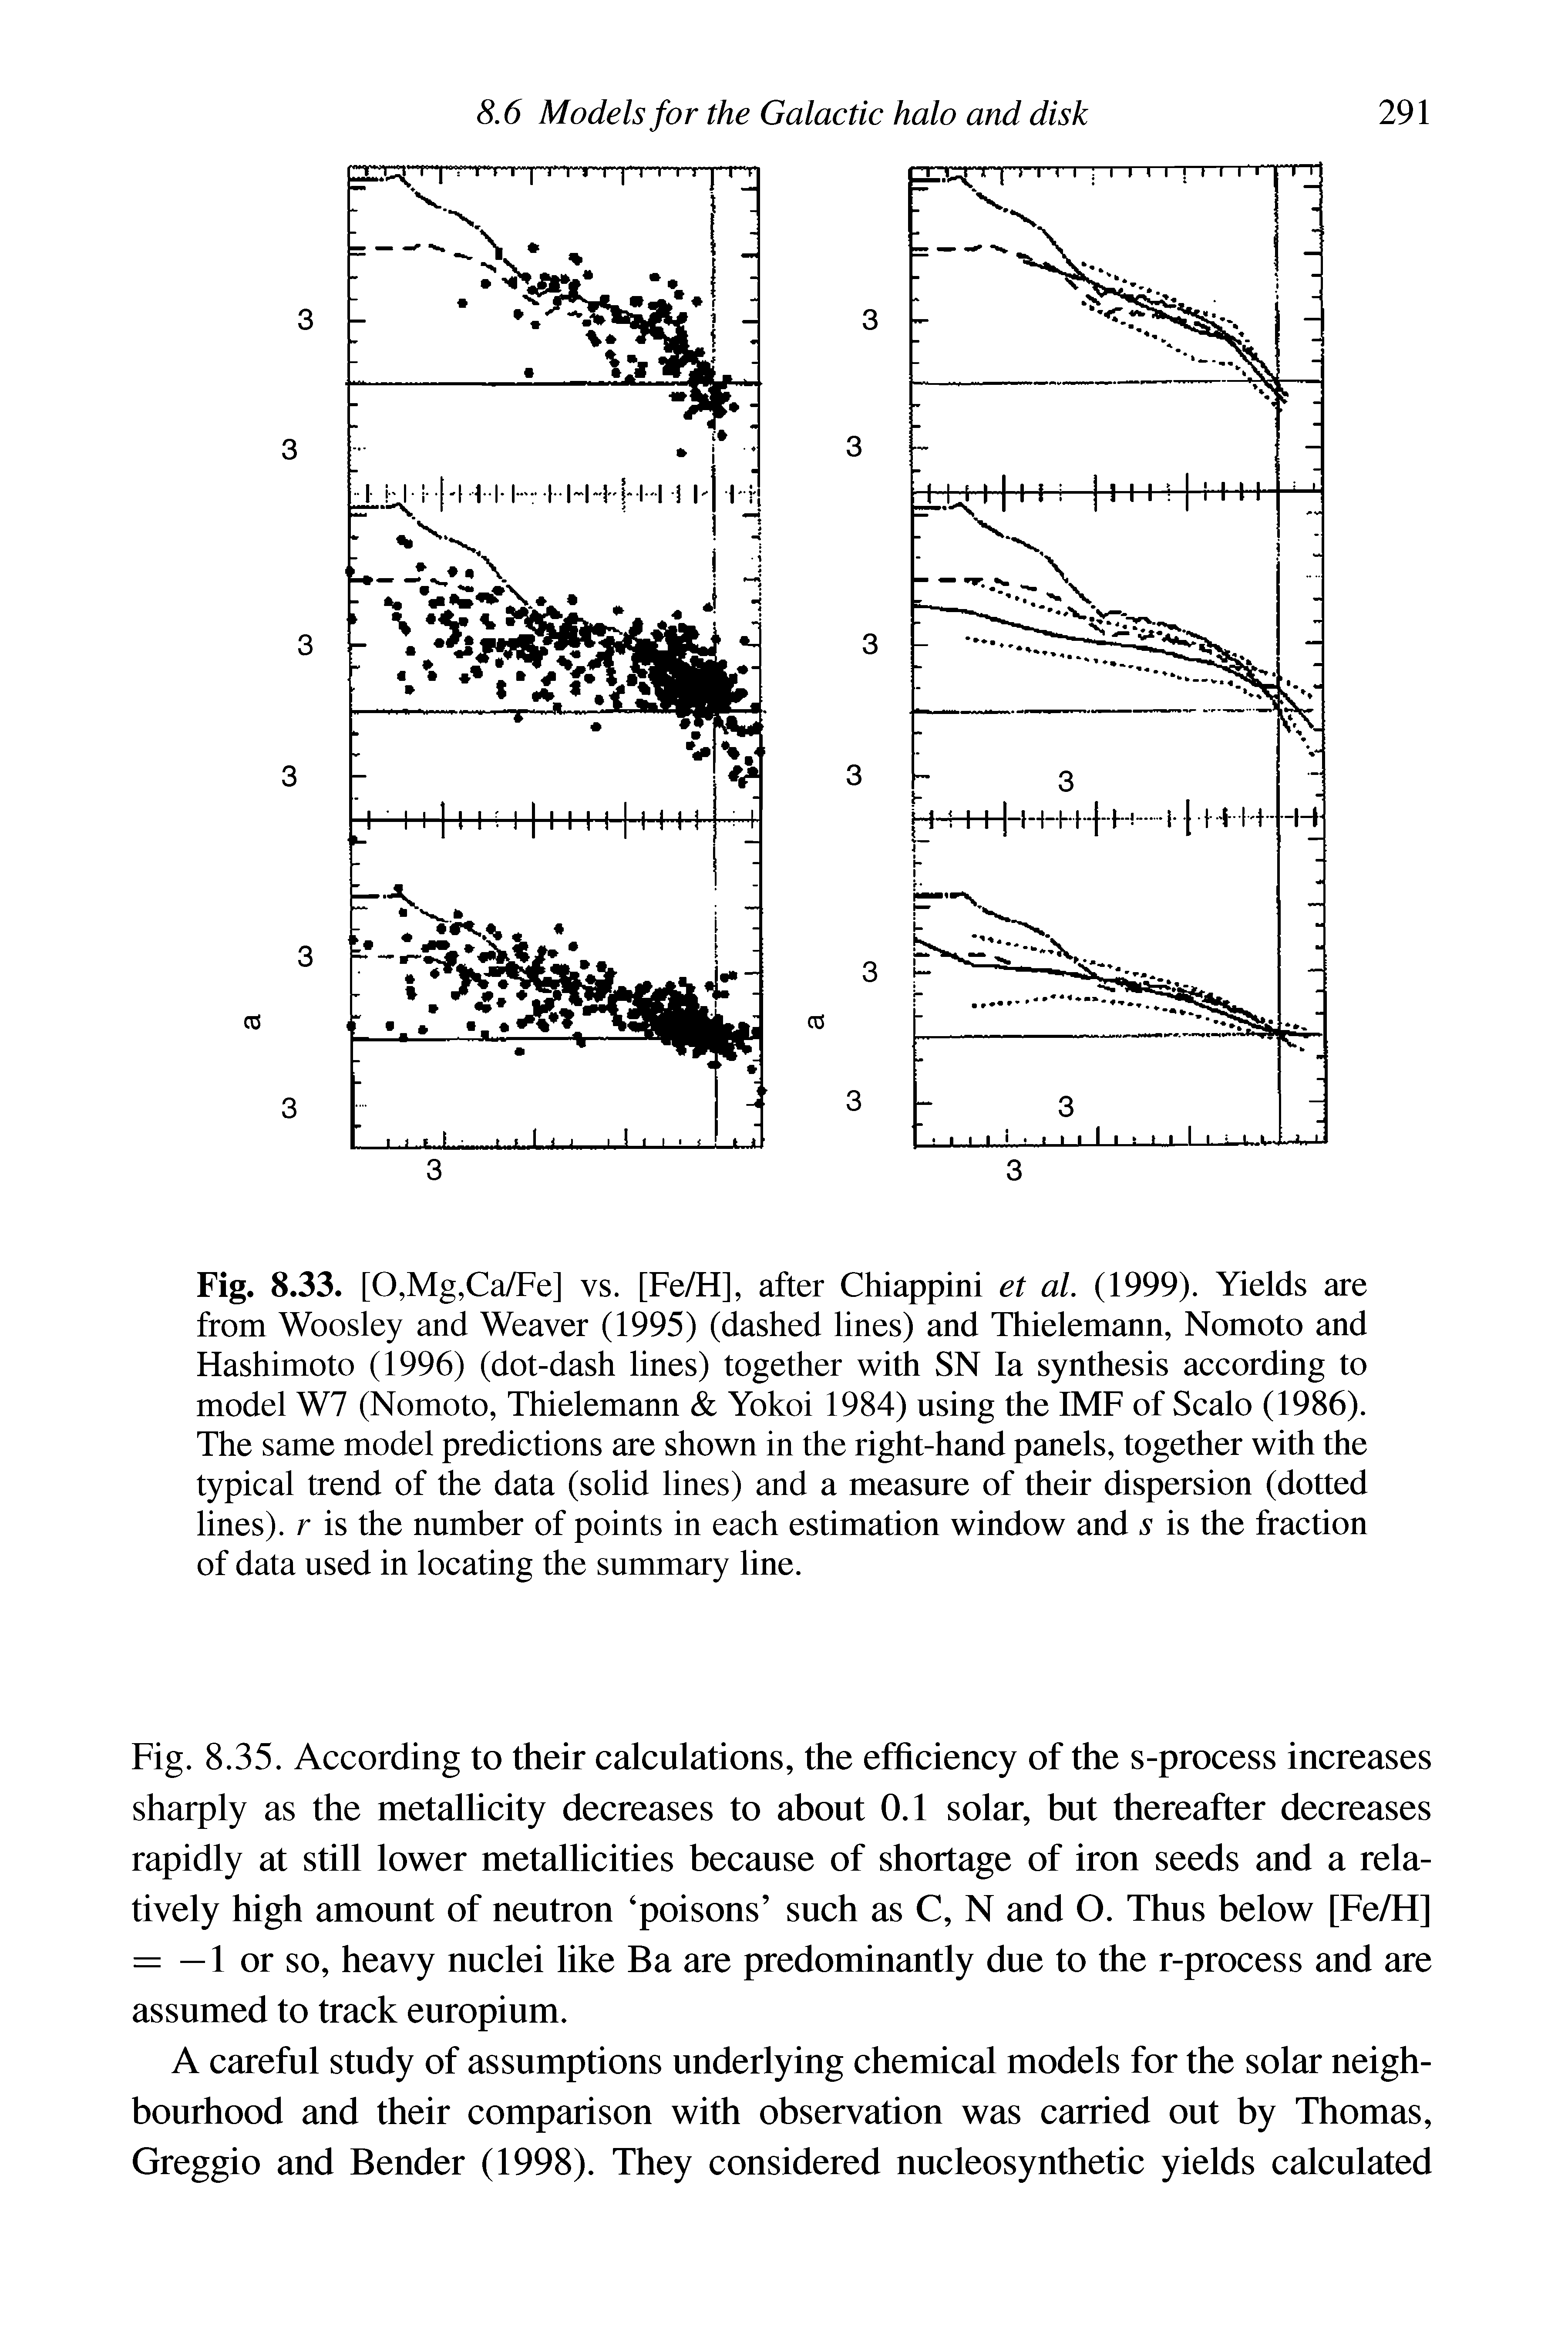 Fig. 8.35. According to their calculations, the efficiency of the s-process increases sharply as the metallicity decreases to about 0.1 solar, but thereafter decreases rapidly at still lower metallicities because of shortage of iron seeds and a relatively high amount of neutron poisons such as C, N and O. Thus below [Fe/H] = — 1 or so, heavy nuclei like Ba are predominantly due to the r-process and are assumed to track europium.